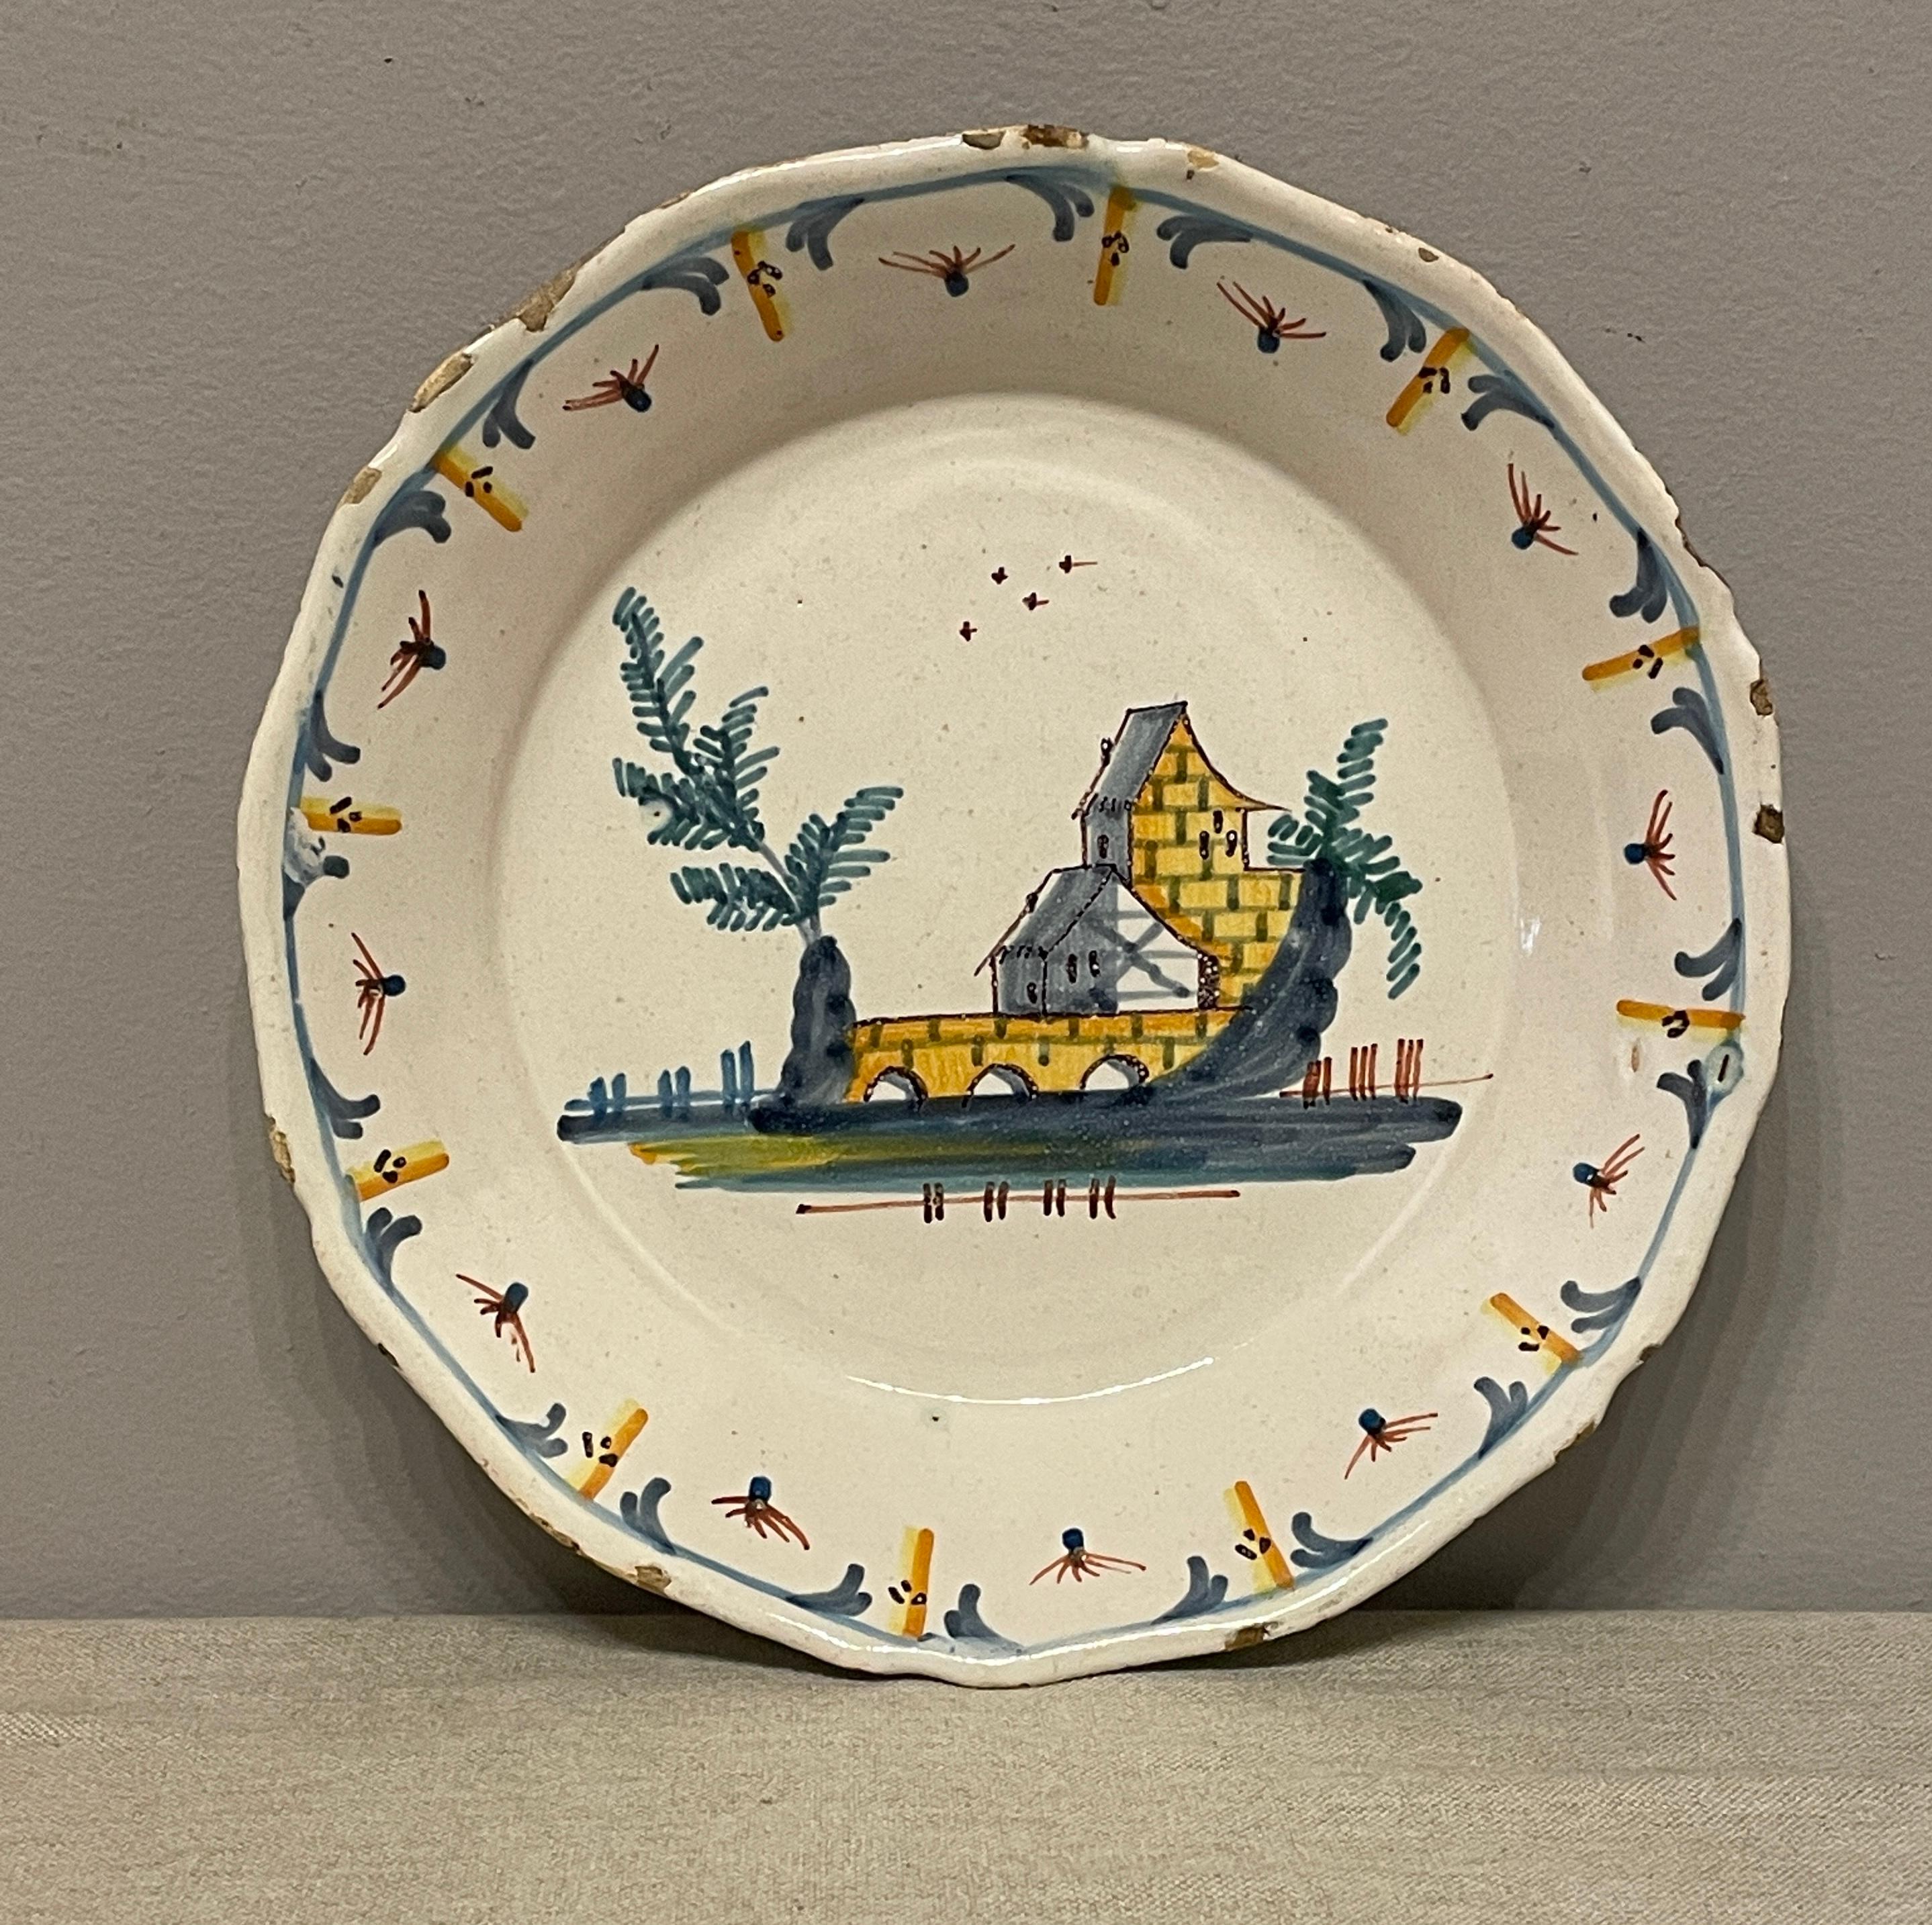 A good 18th century French Faience from La Rochelle with Primitive hand painted decor. All in good condition with chips around the edges. No hairline and no restorations noted. Dimensions are 9